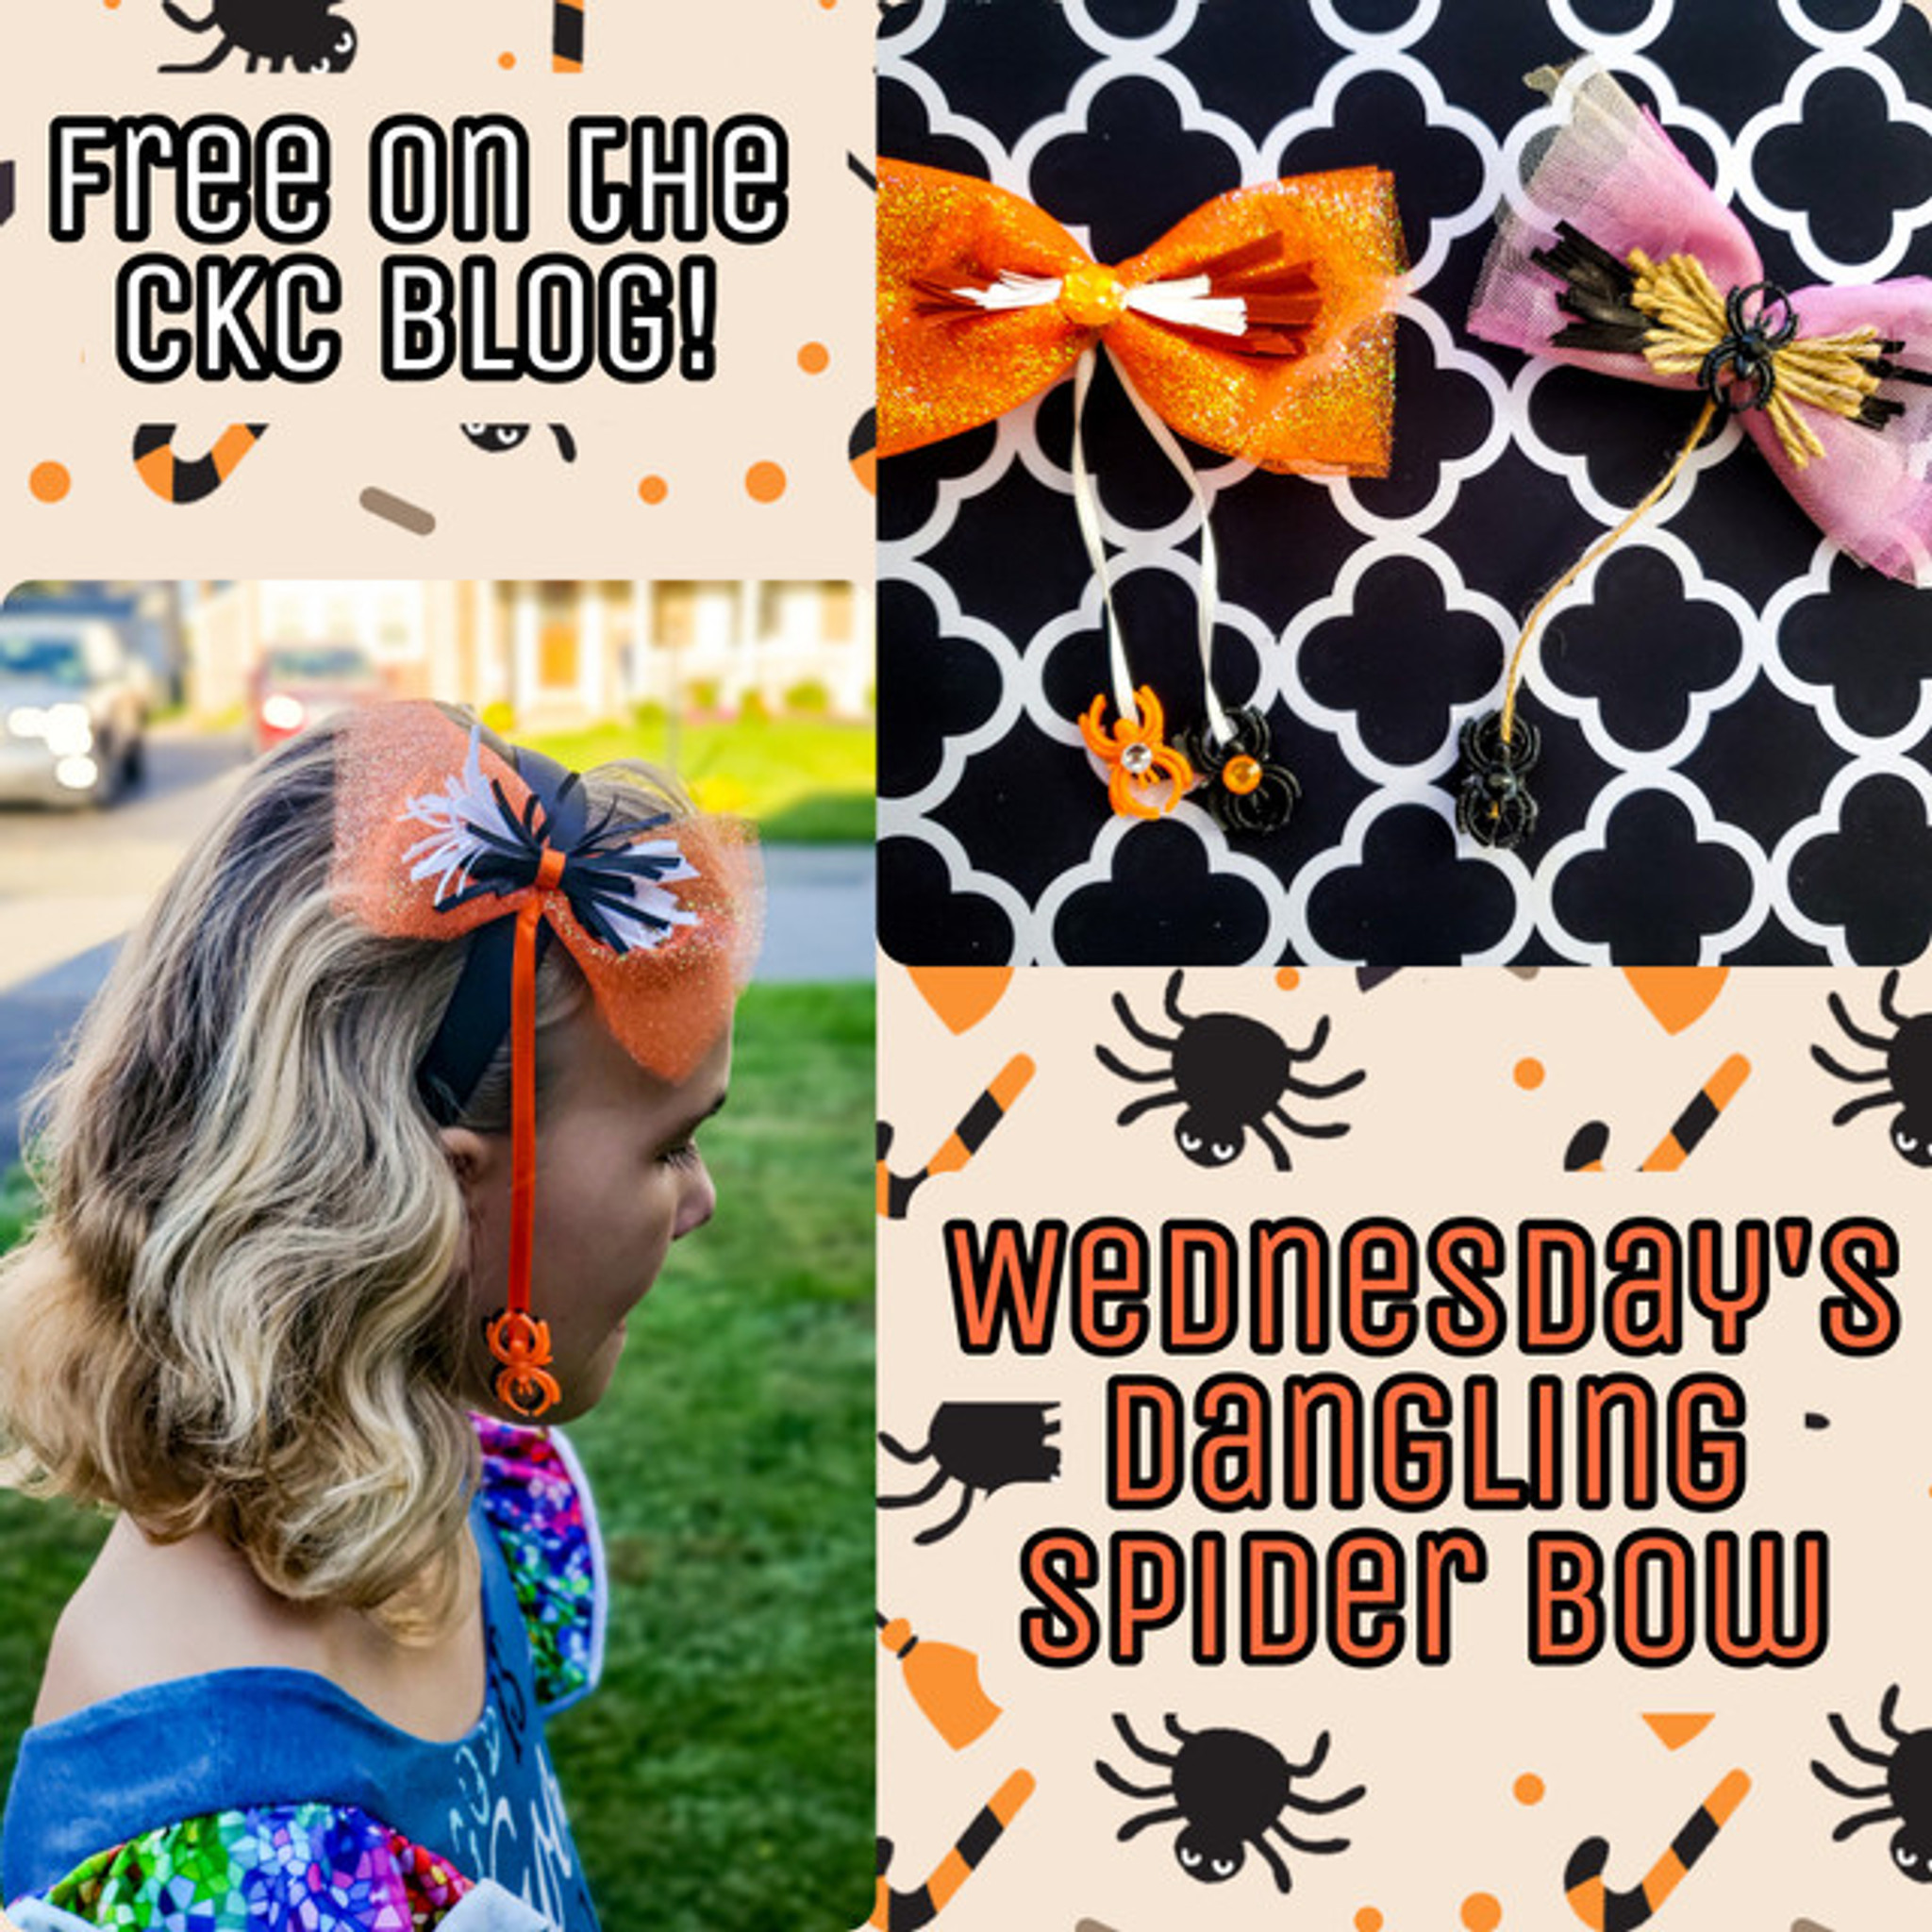 CKC's Spooky Side:  Wednesday's Dangling Spider Bow